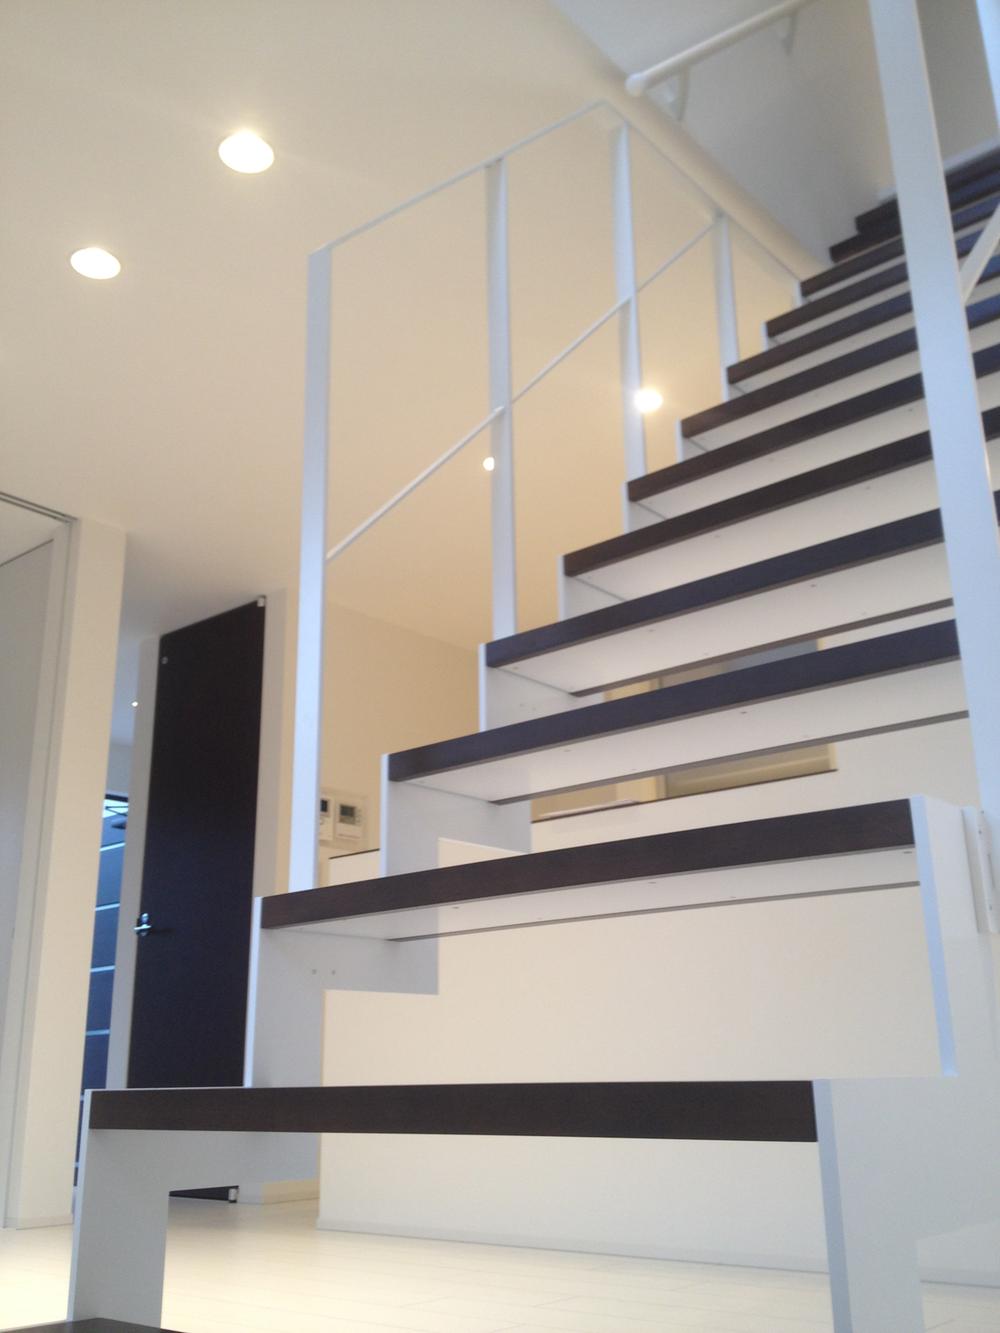 Other introspection. Stylish living stairs